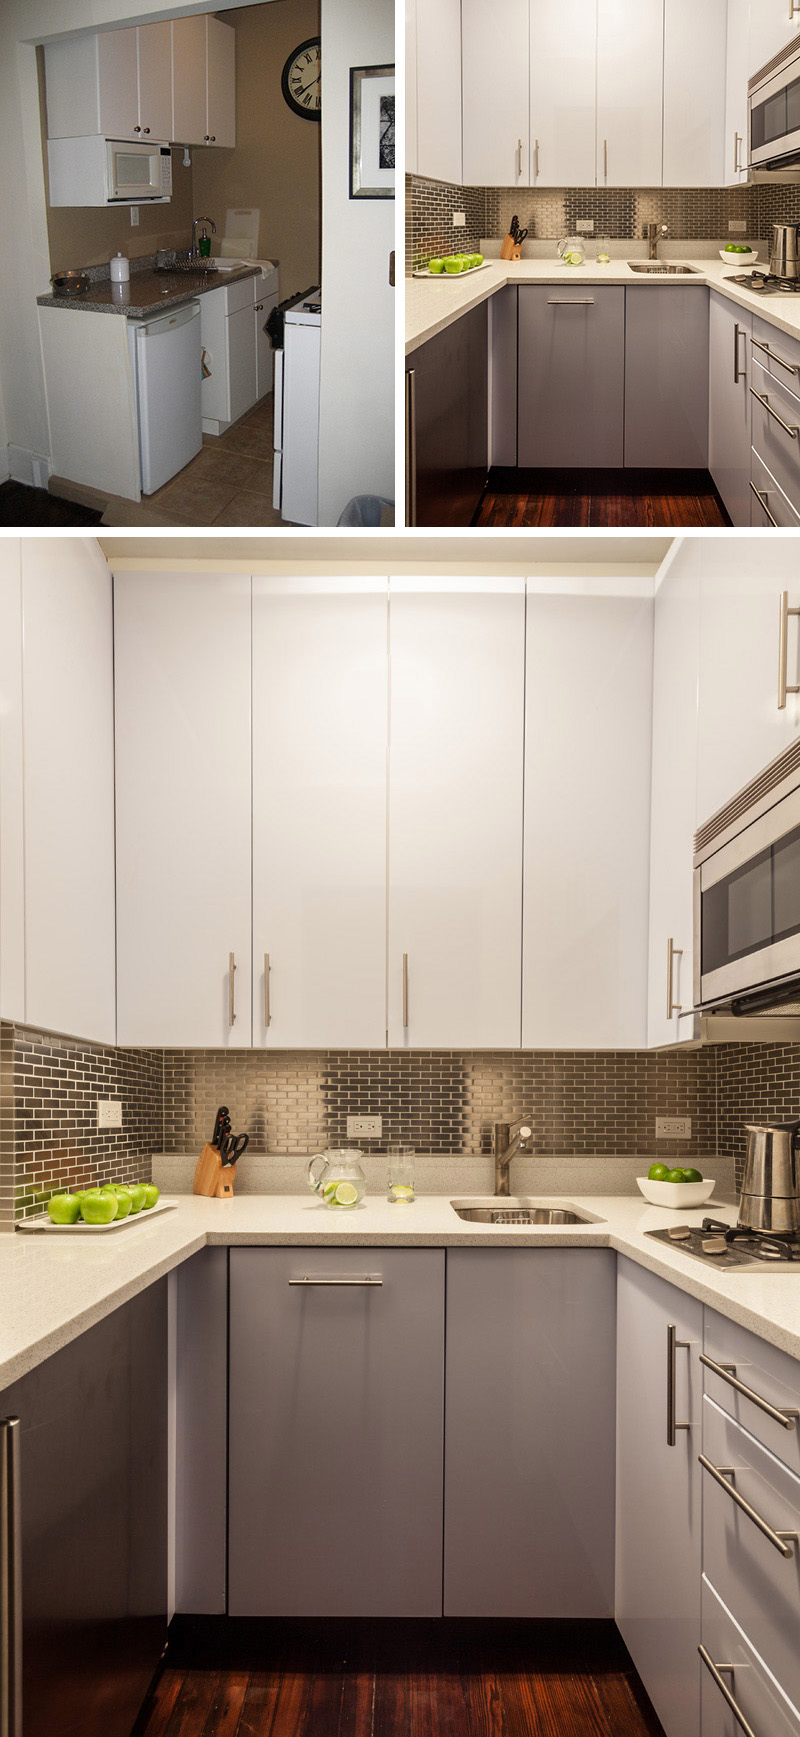 While the size remained the same, a new layout, new cabinetry, a stainless steel backsplash and new appliances gave this small kitchen a big upgrade and a more modern look.